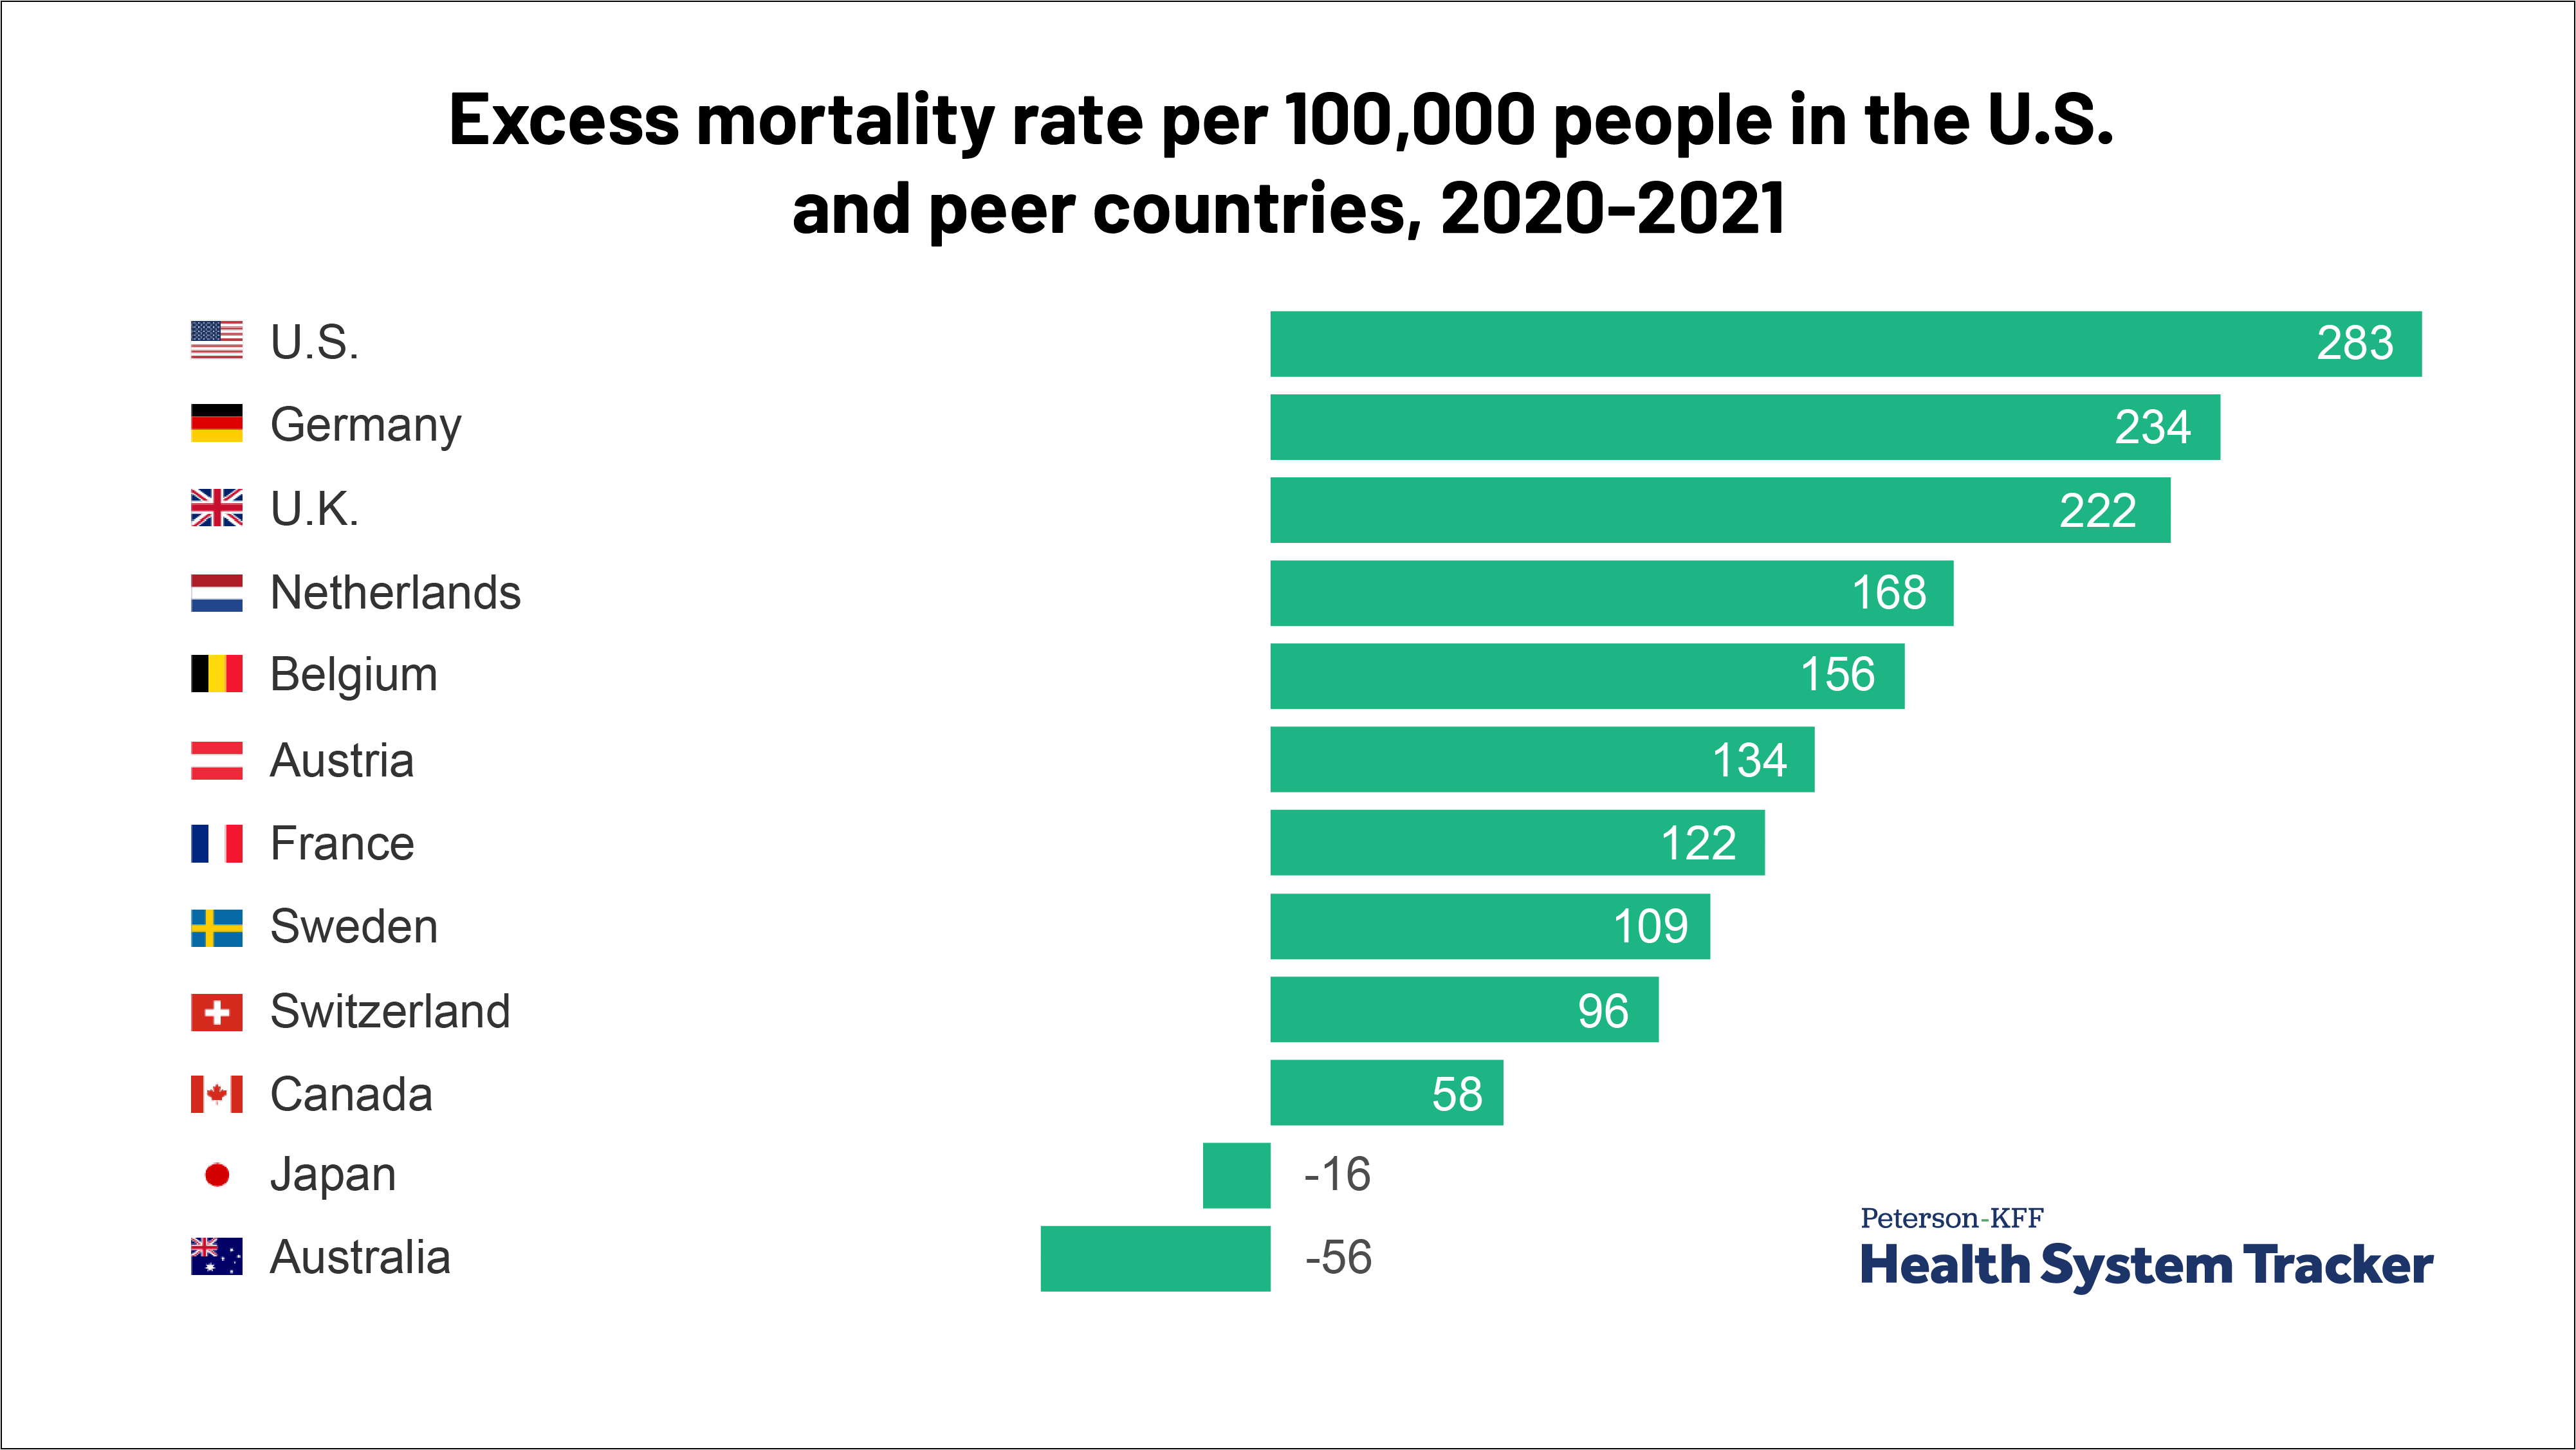 Trends in mortality patterns in two countries with different